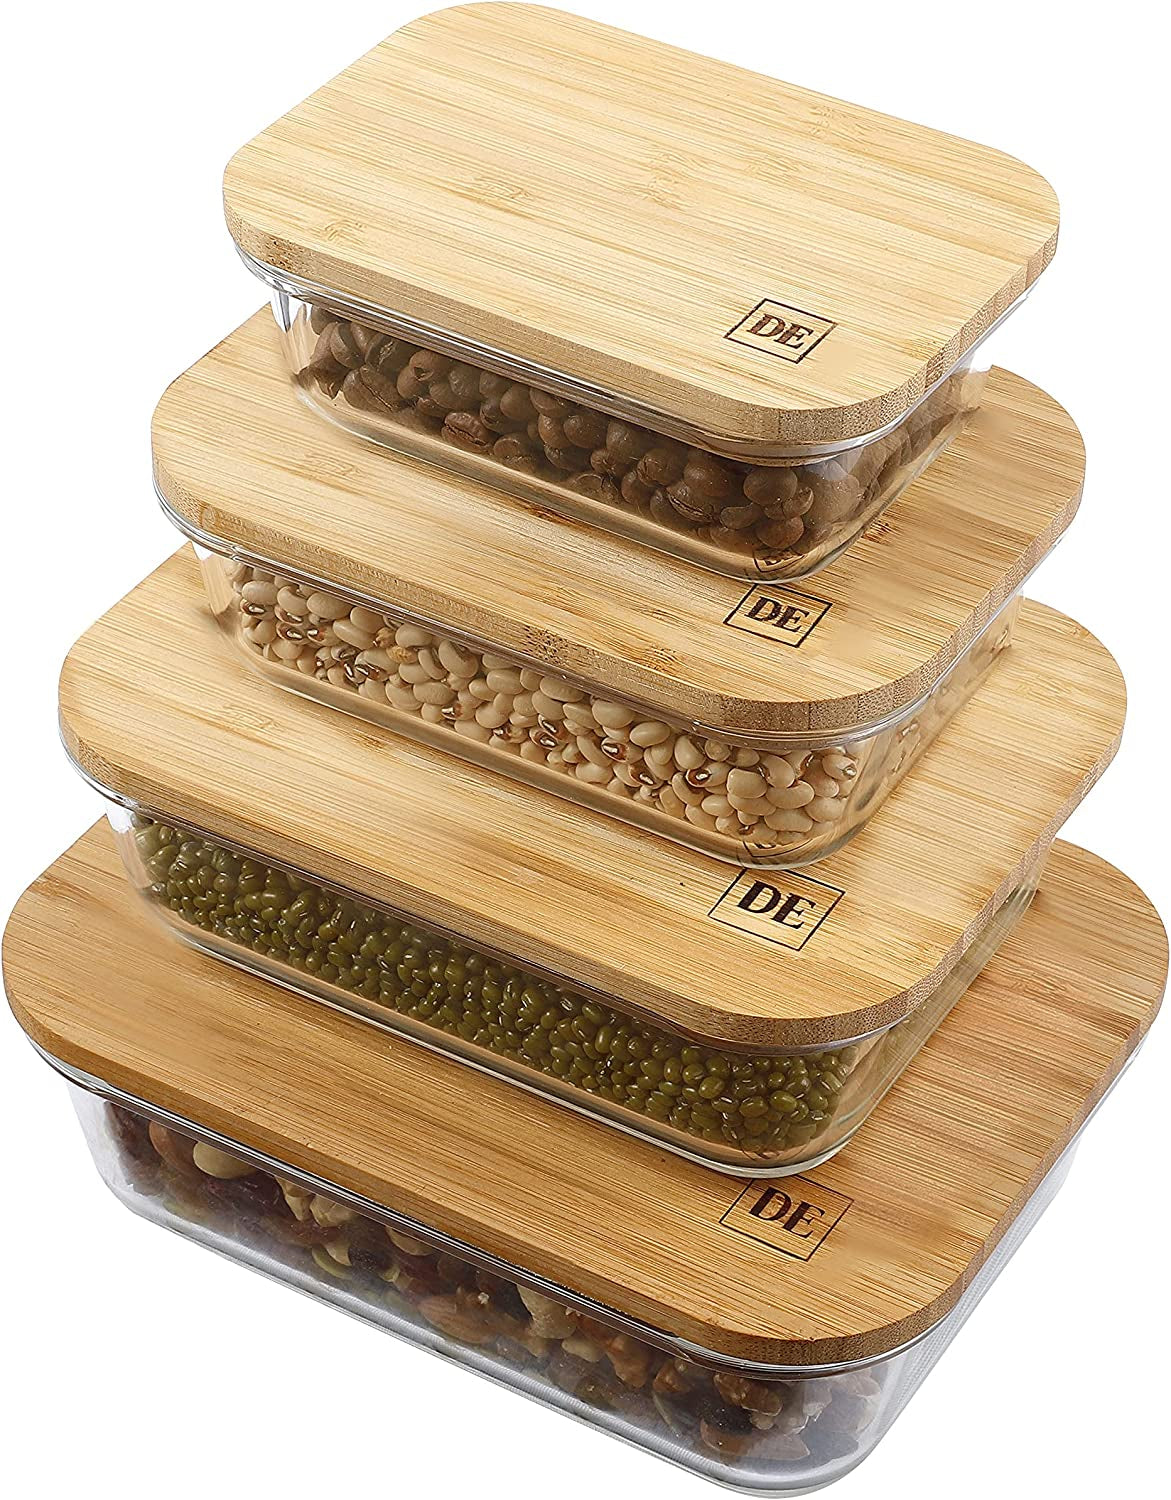 Glass Food Storage Containers with Bamboo Lids (Pack of 4), Eco Friendly Meal Prep Containers Reusable – Airtight, Plastic Free, BPA Free